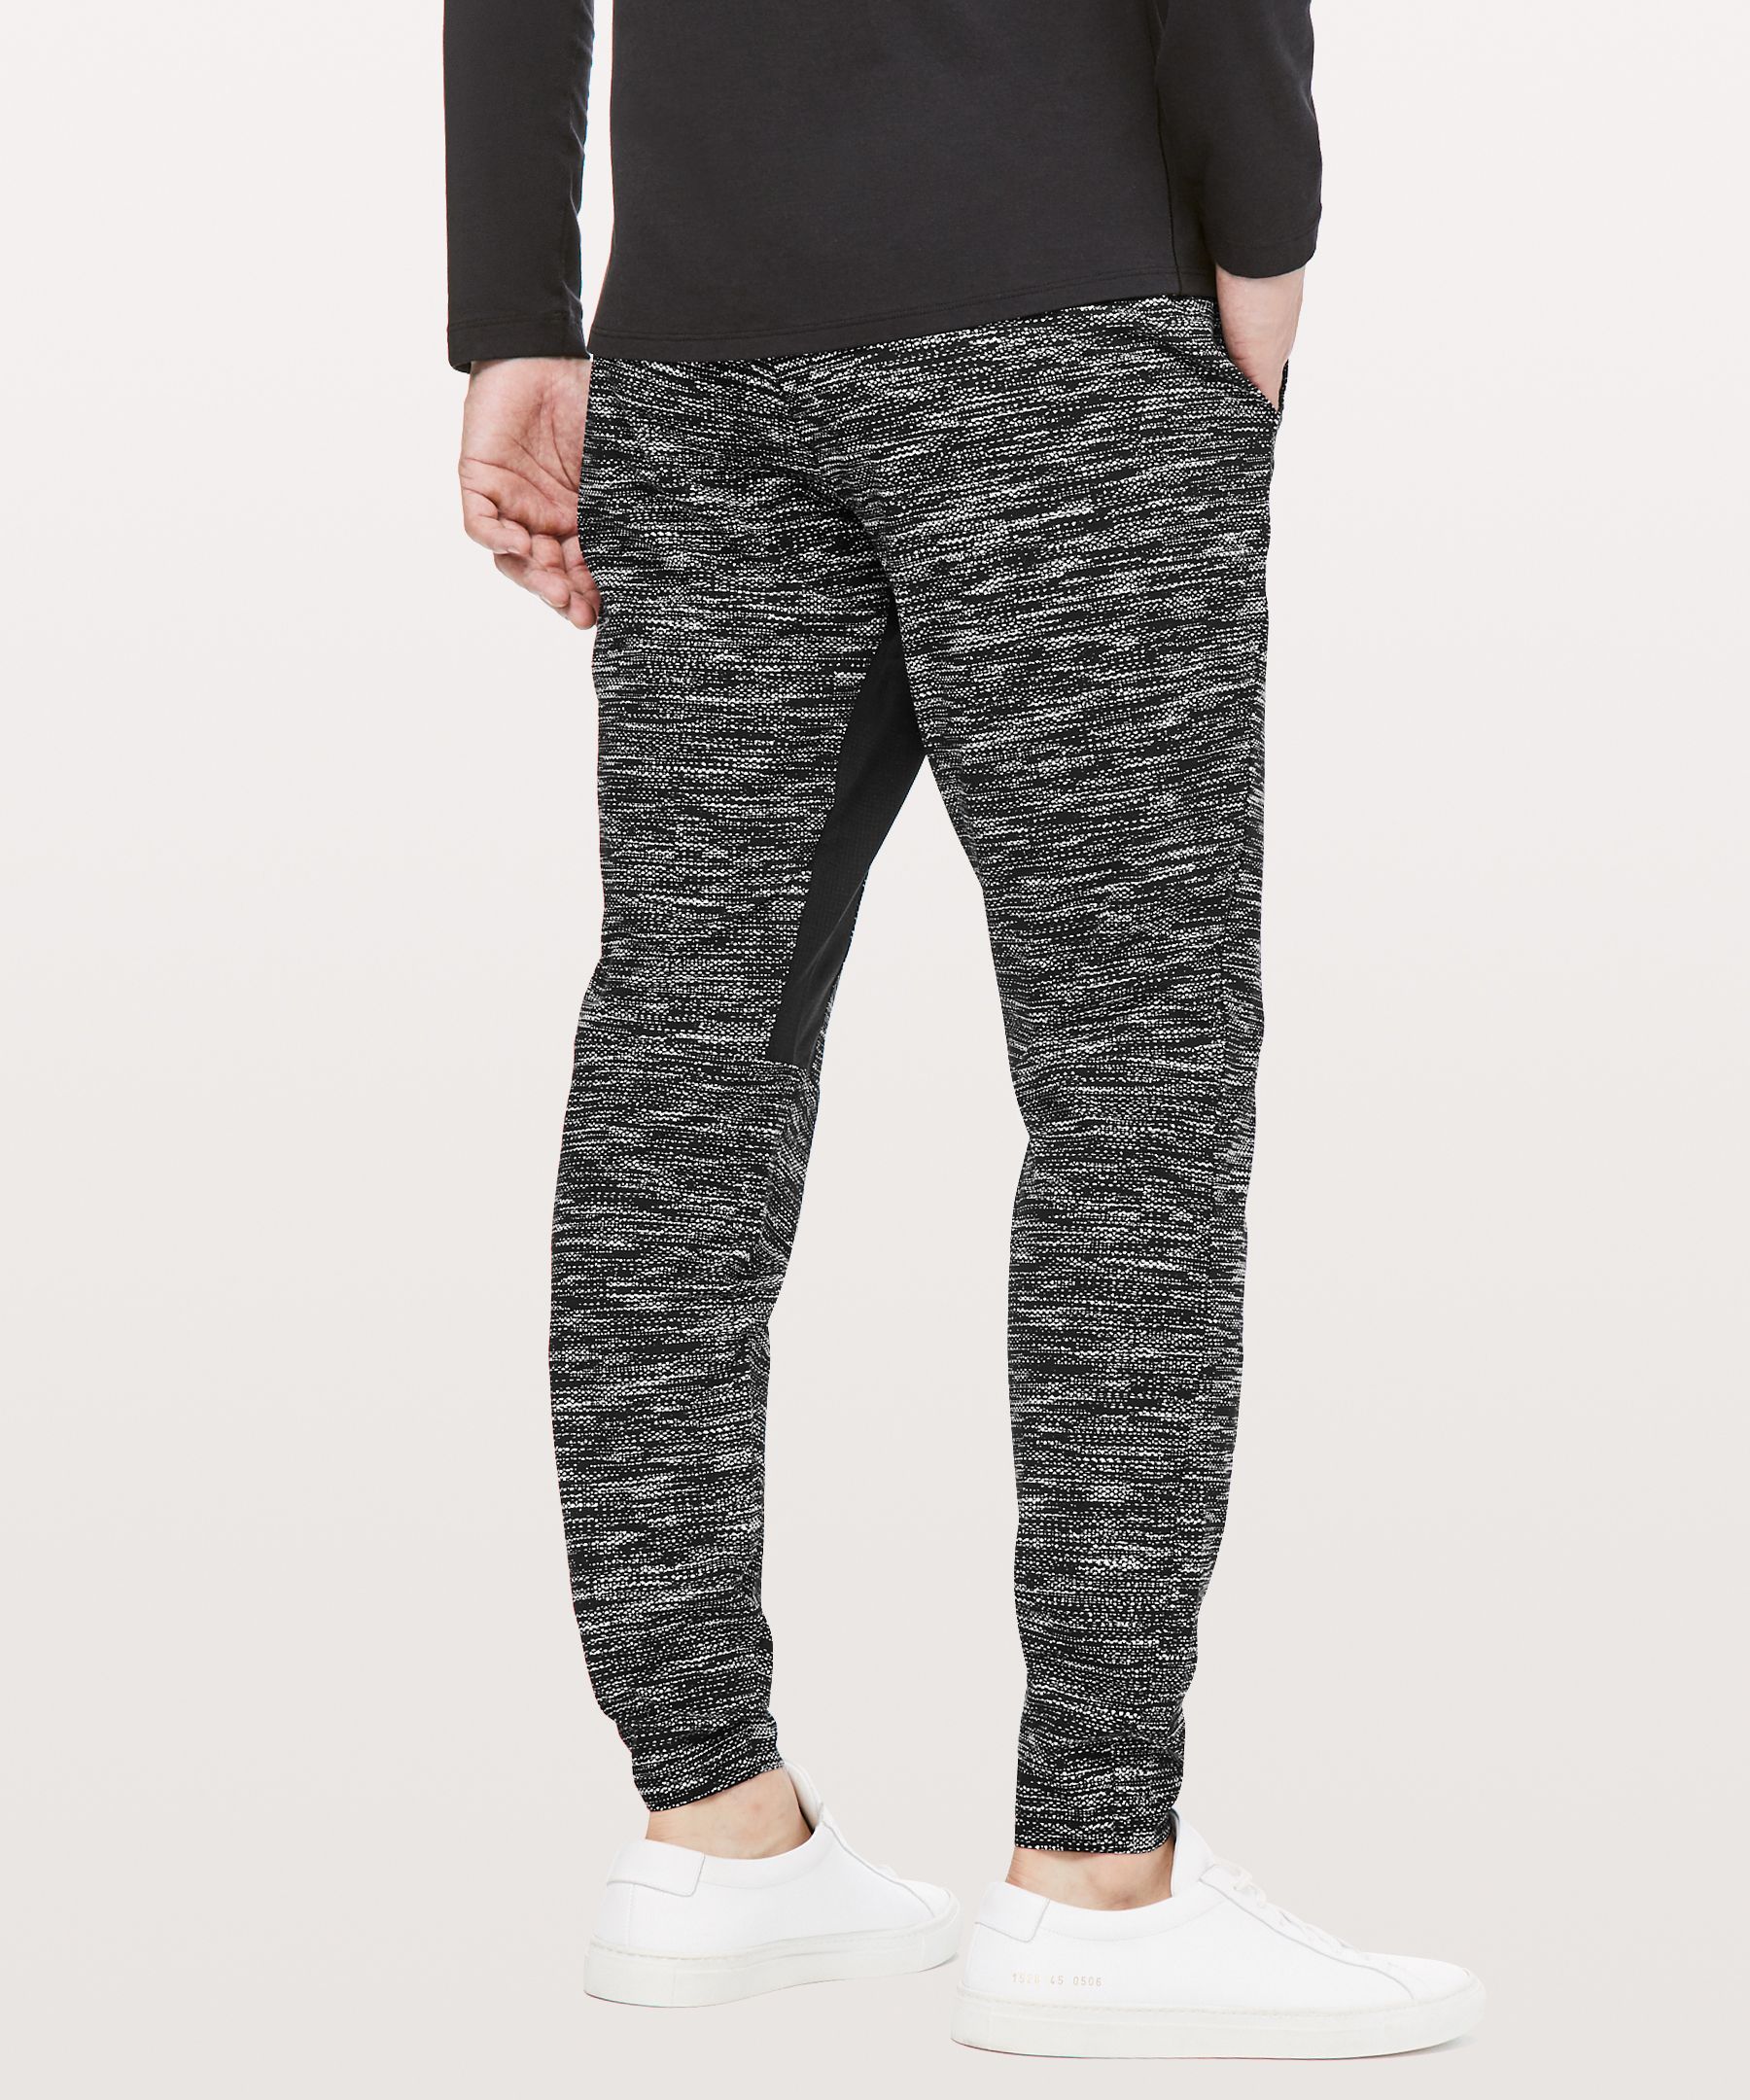 Lululemon In Mind Pant Review Journal